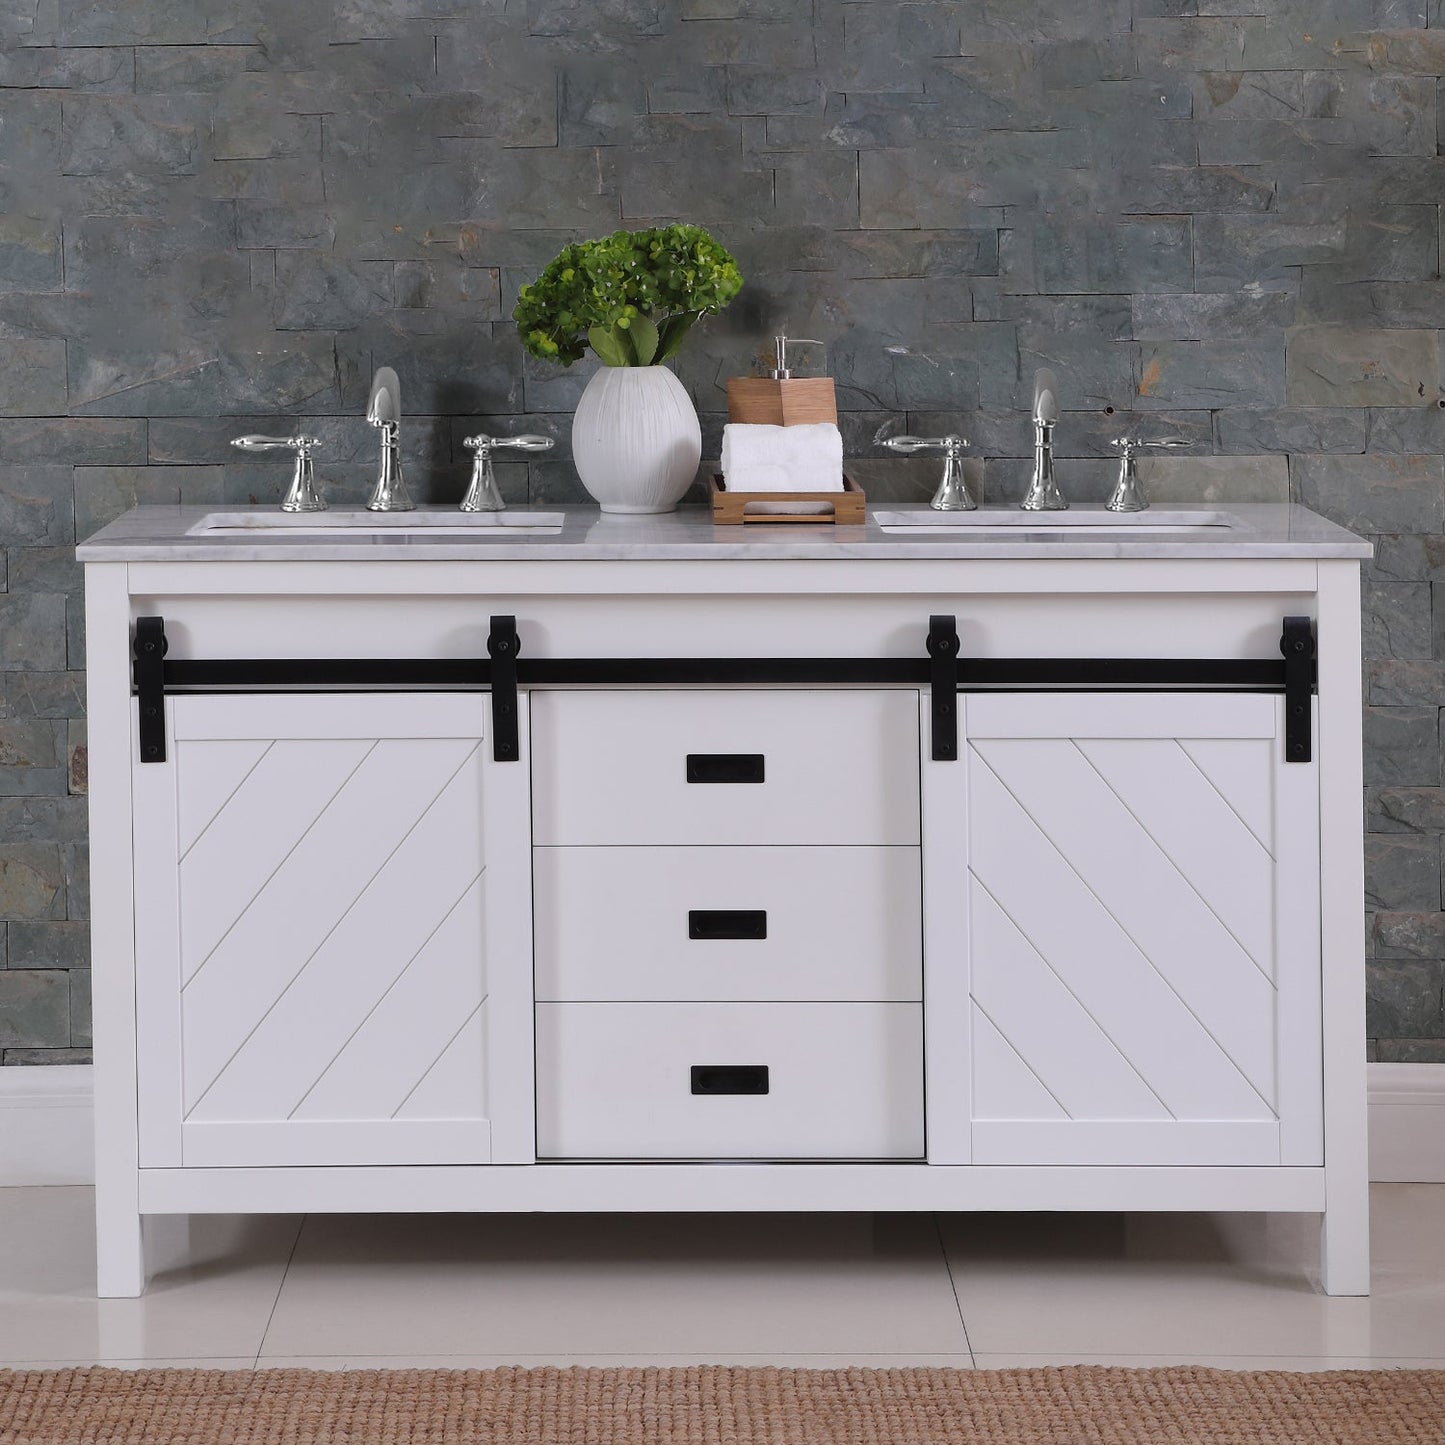 Kinsley 60" Double Bathroom Vanity Set in White and Carrara White Marble Countertop without Mirror